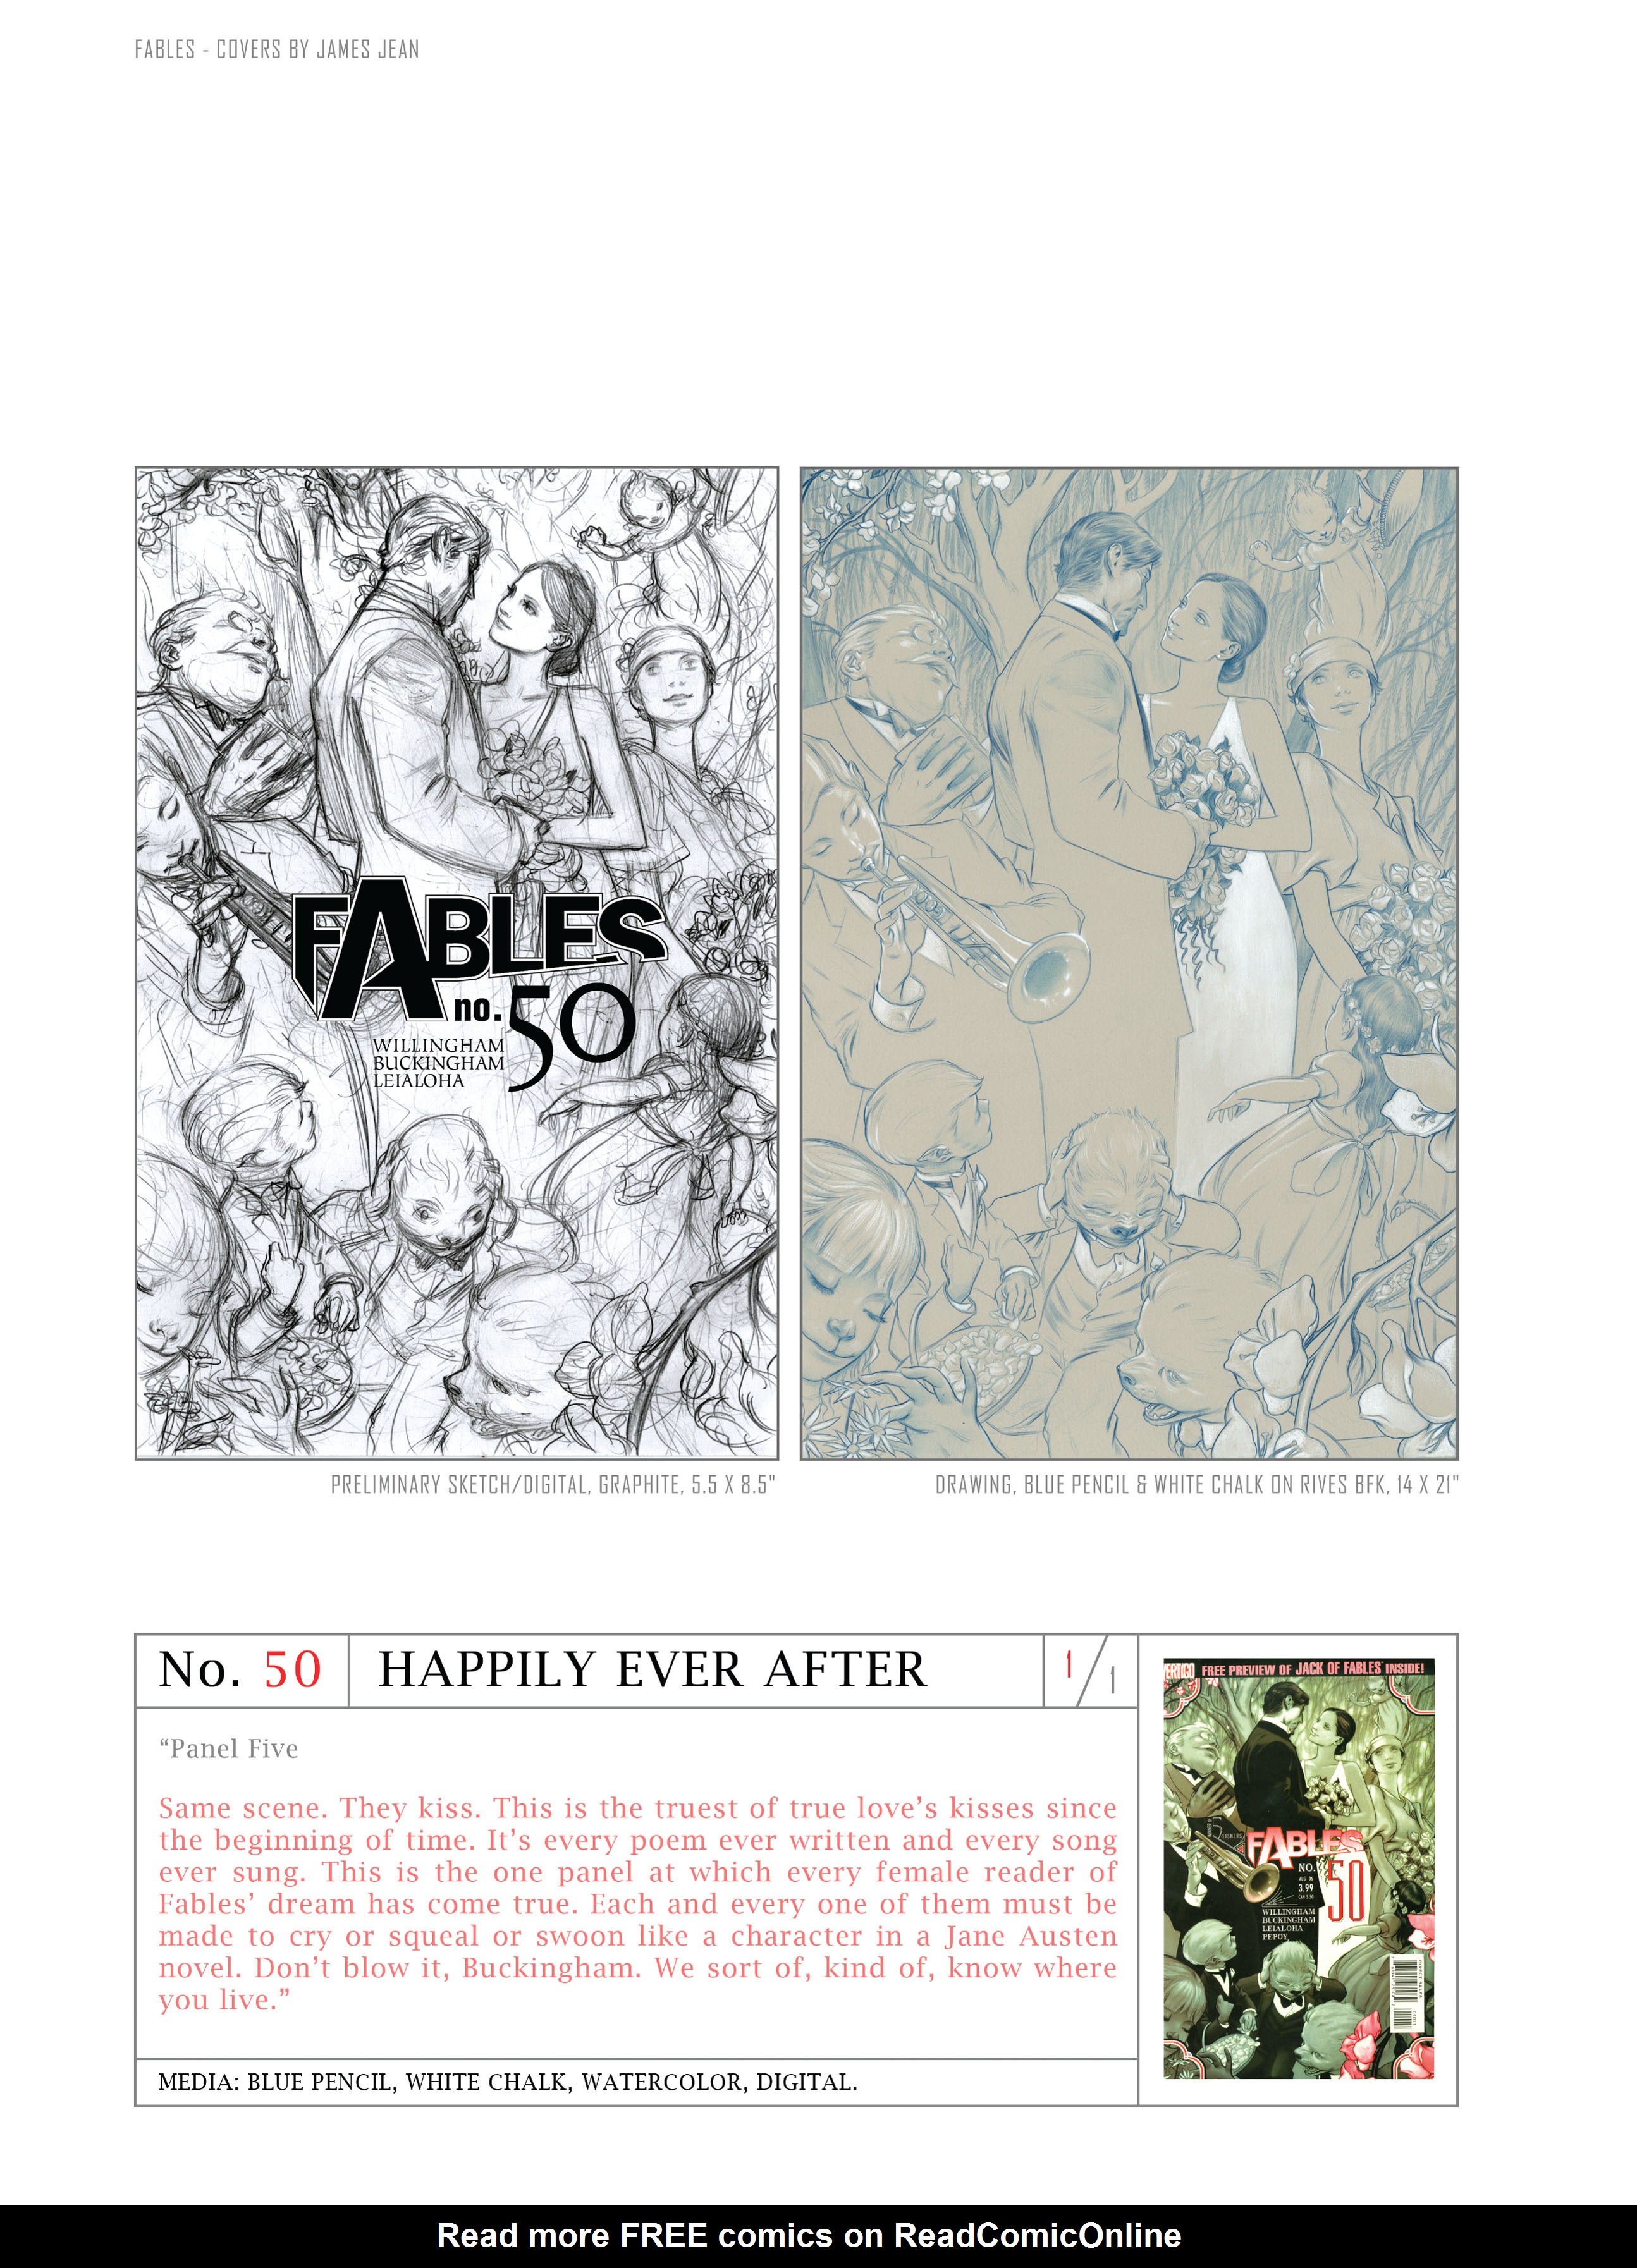 Read online Fables: Covers by James Jean comic -  Issue # TPB (Part 2) - 27